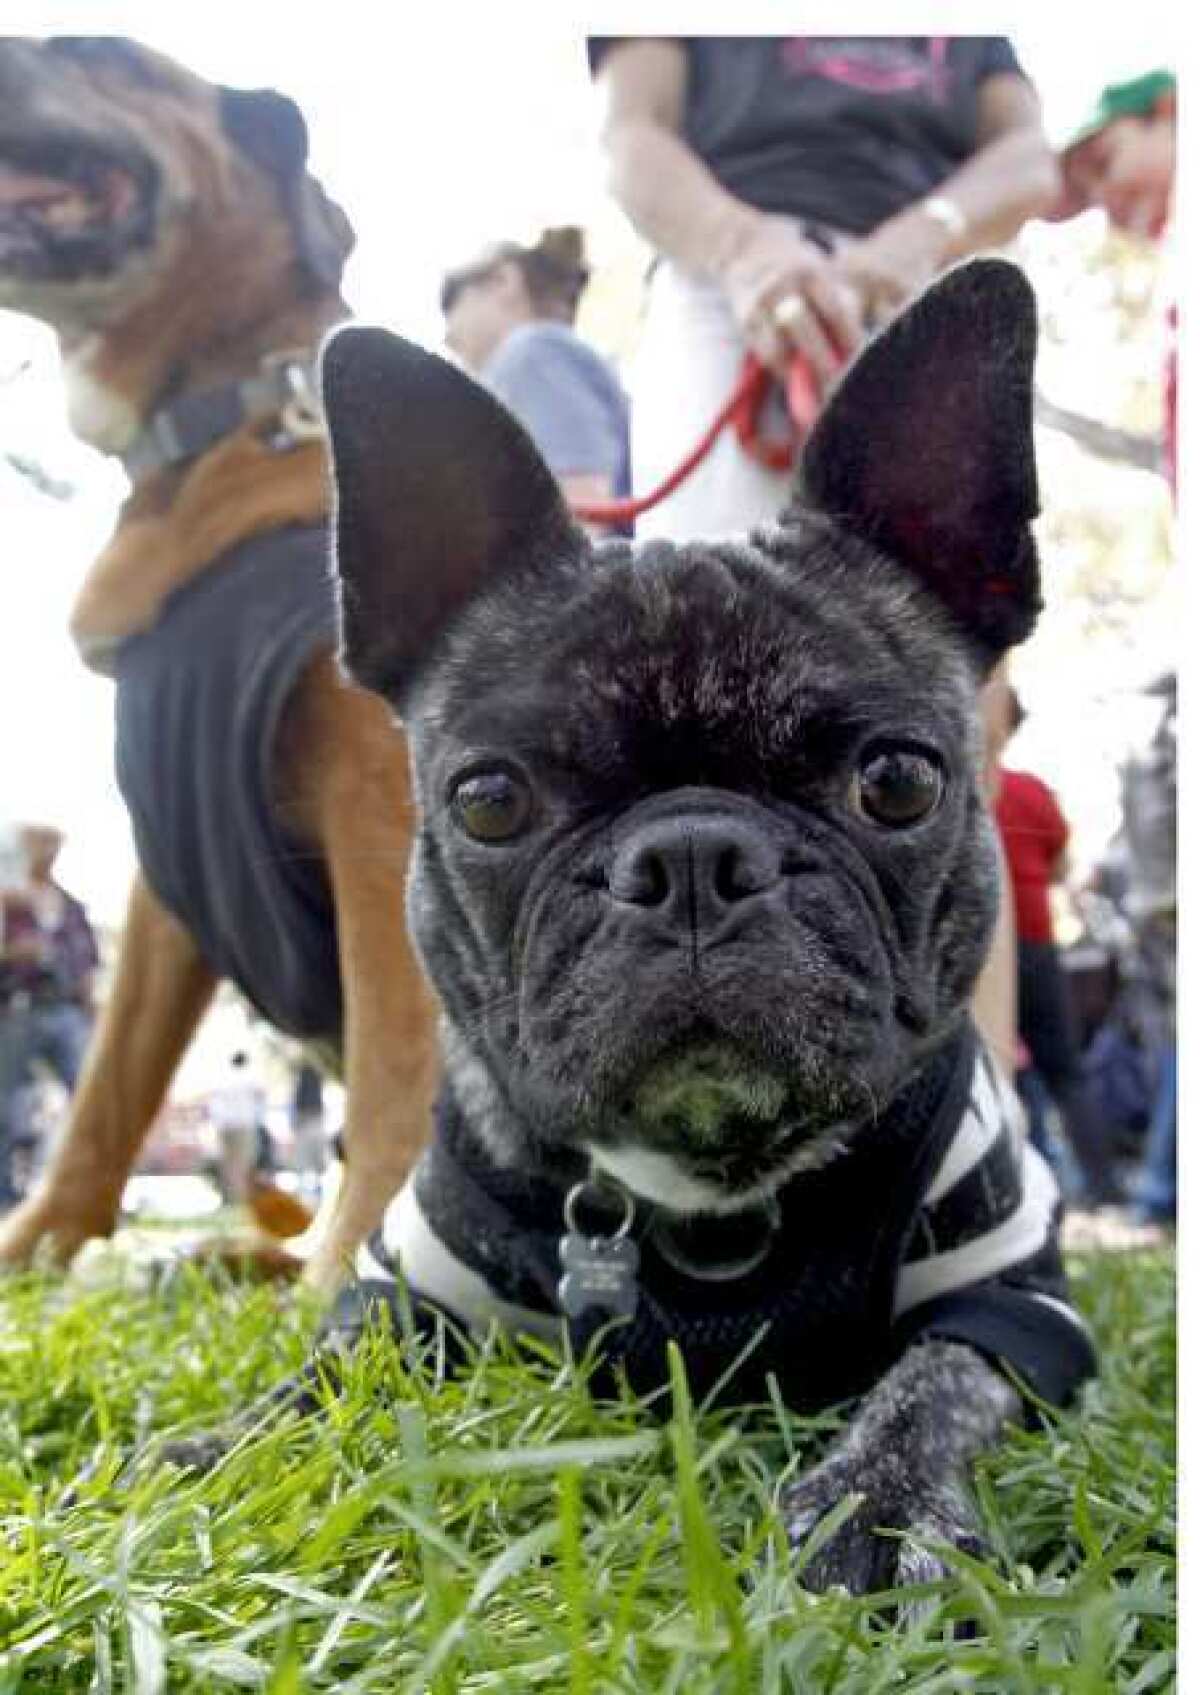 Bugg the Pug, owned by Carol De Pompa, takes a break on the grass during last year's K-9's in the Park at Verdugo Park in Glendale.